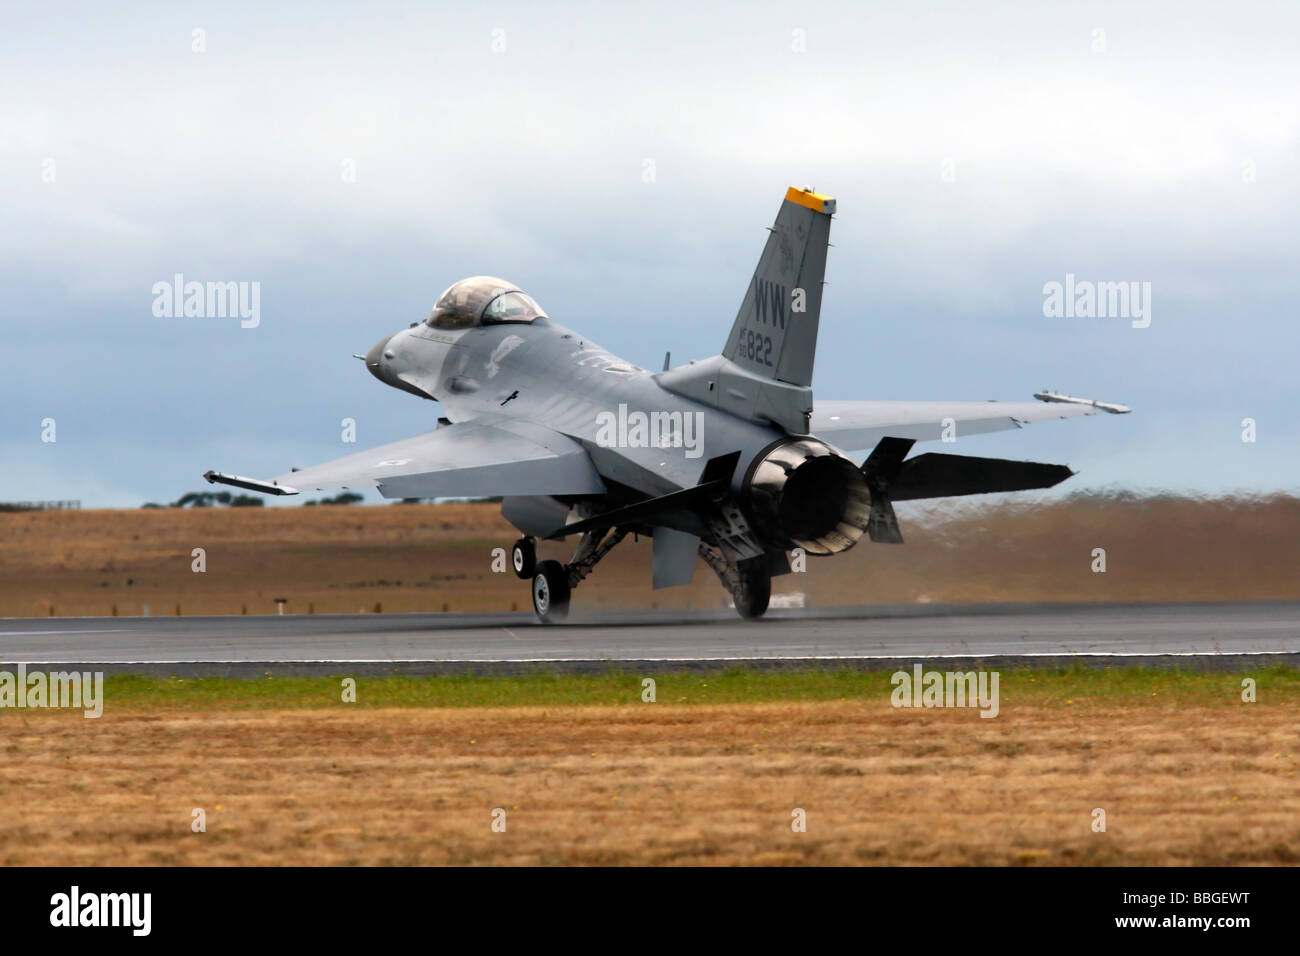 F 16 Fighting Falcon Landing Banque D'Images